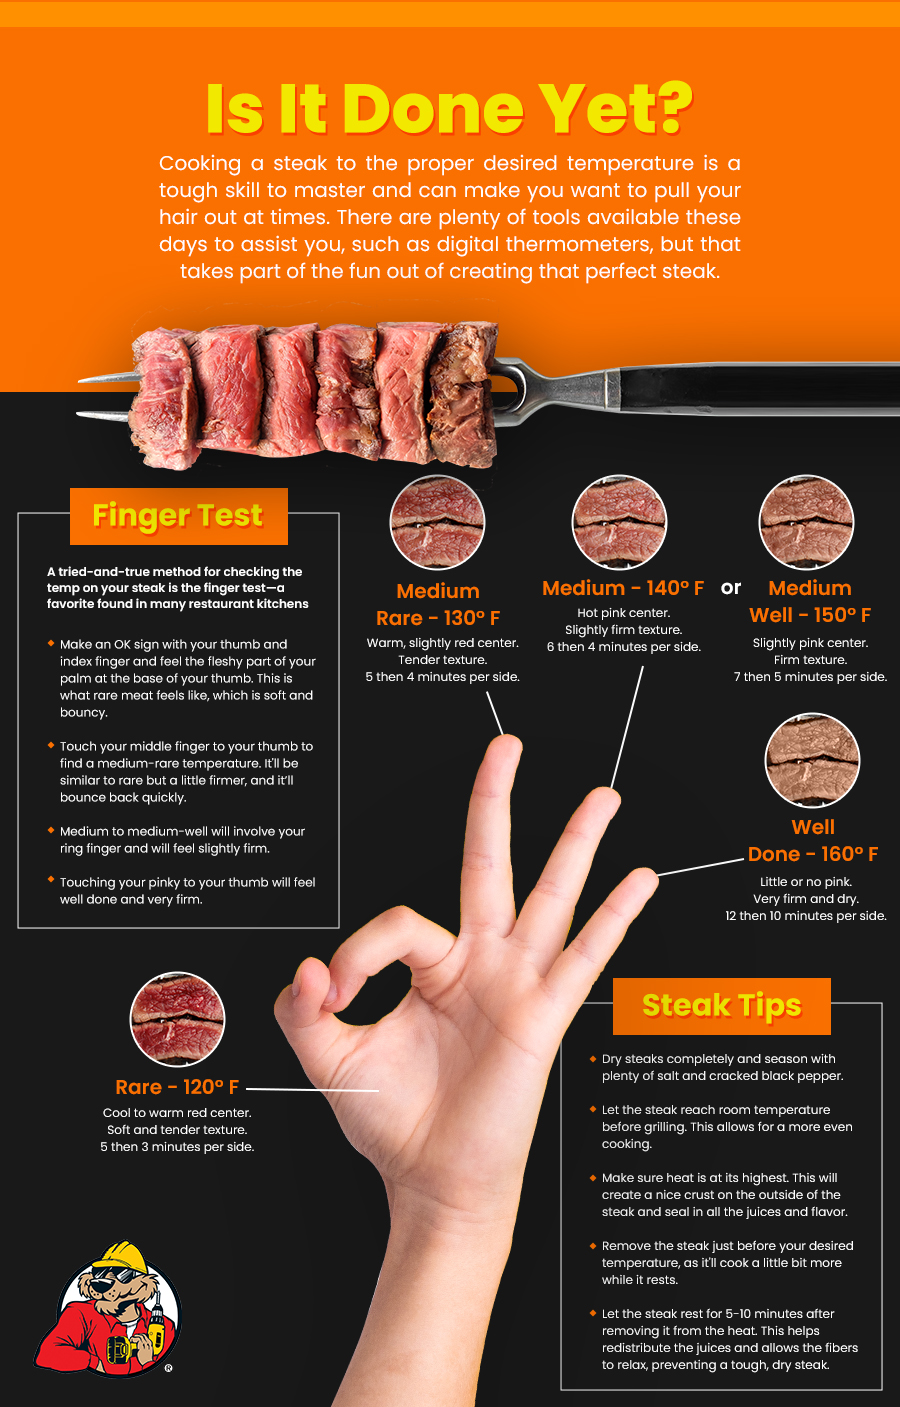 Guide to the perfect steak temperature.